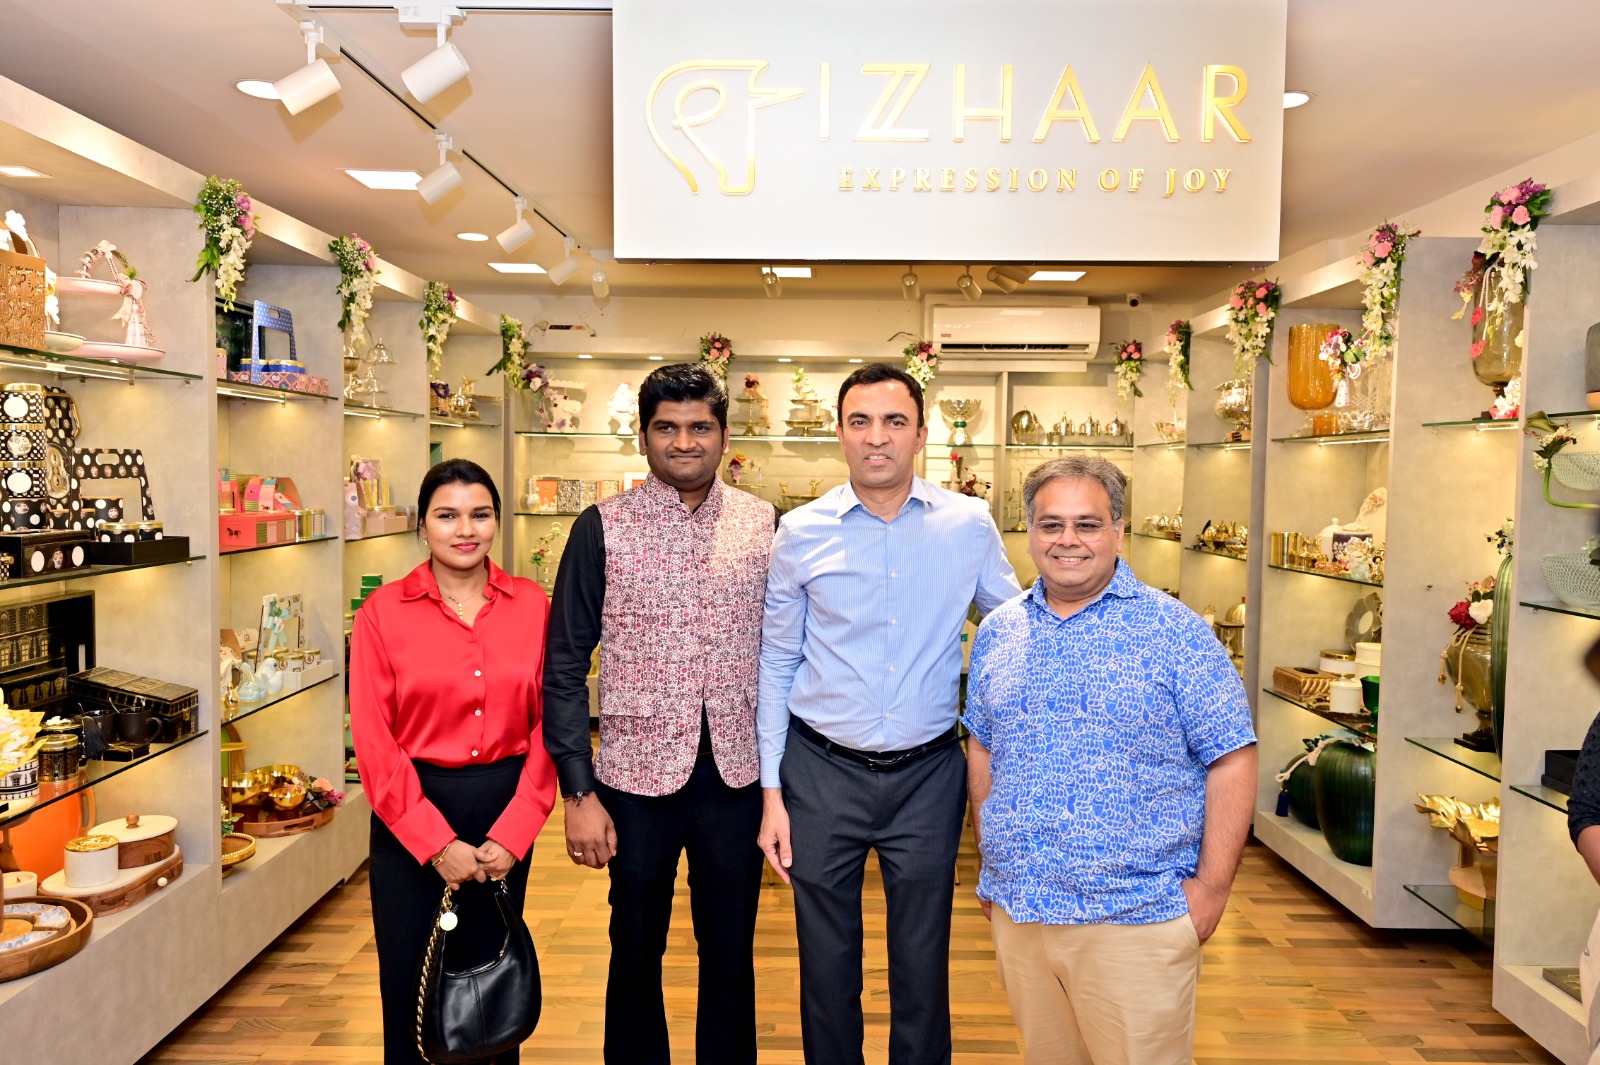 After unveiling the dazzling new studio in Juhu, Mumbai, Izzhaar launched a new store in Chennai, Tamil Nadu. On the exciting new endeavour inaugurated in the presence of N DakshinaaMurthi, Founder and Chief Executive Officer of Wedding Vows.